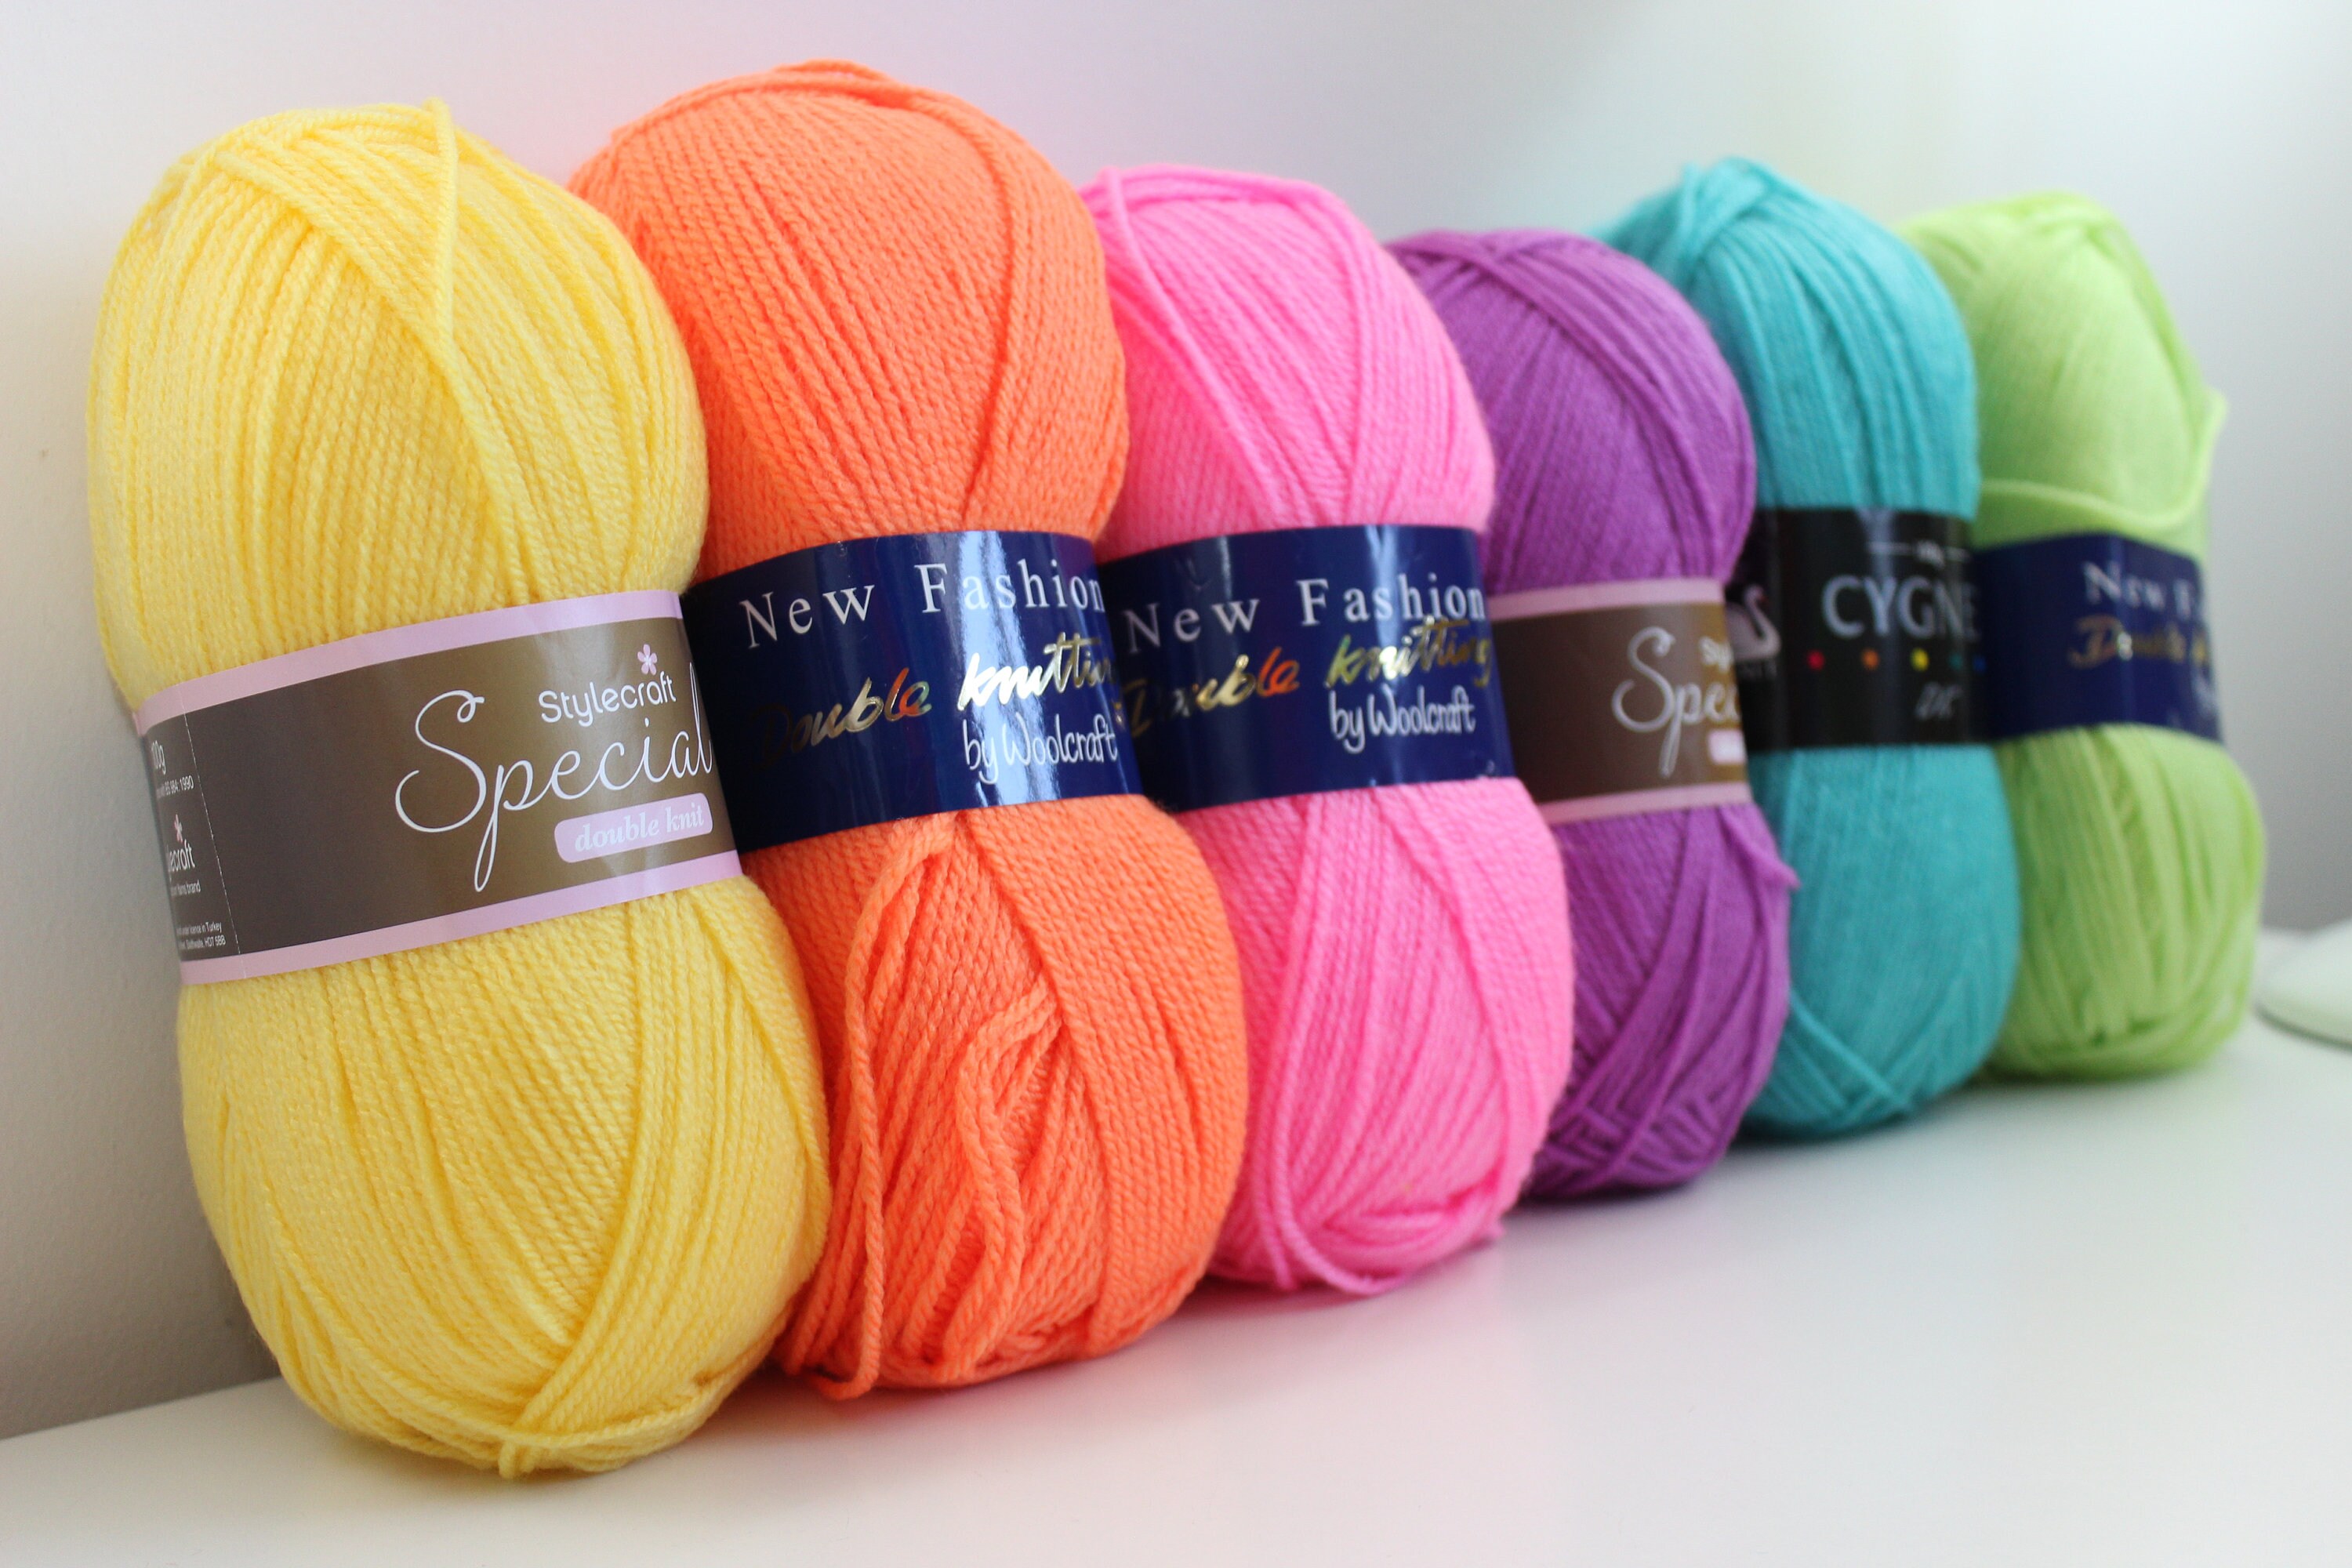 2 Bundles Crochet Yarn Skeins Soft Wool Crochet Yarn for Knitting and  Crafts, Multicolored Gradient Skeins Sweater Scarf Crafting Woven Skeins  Warm